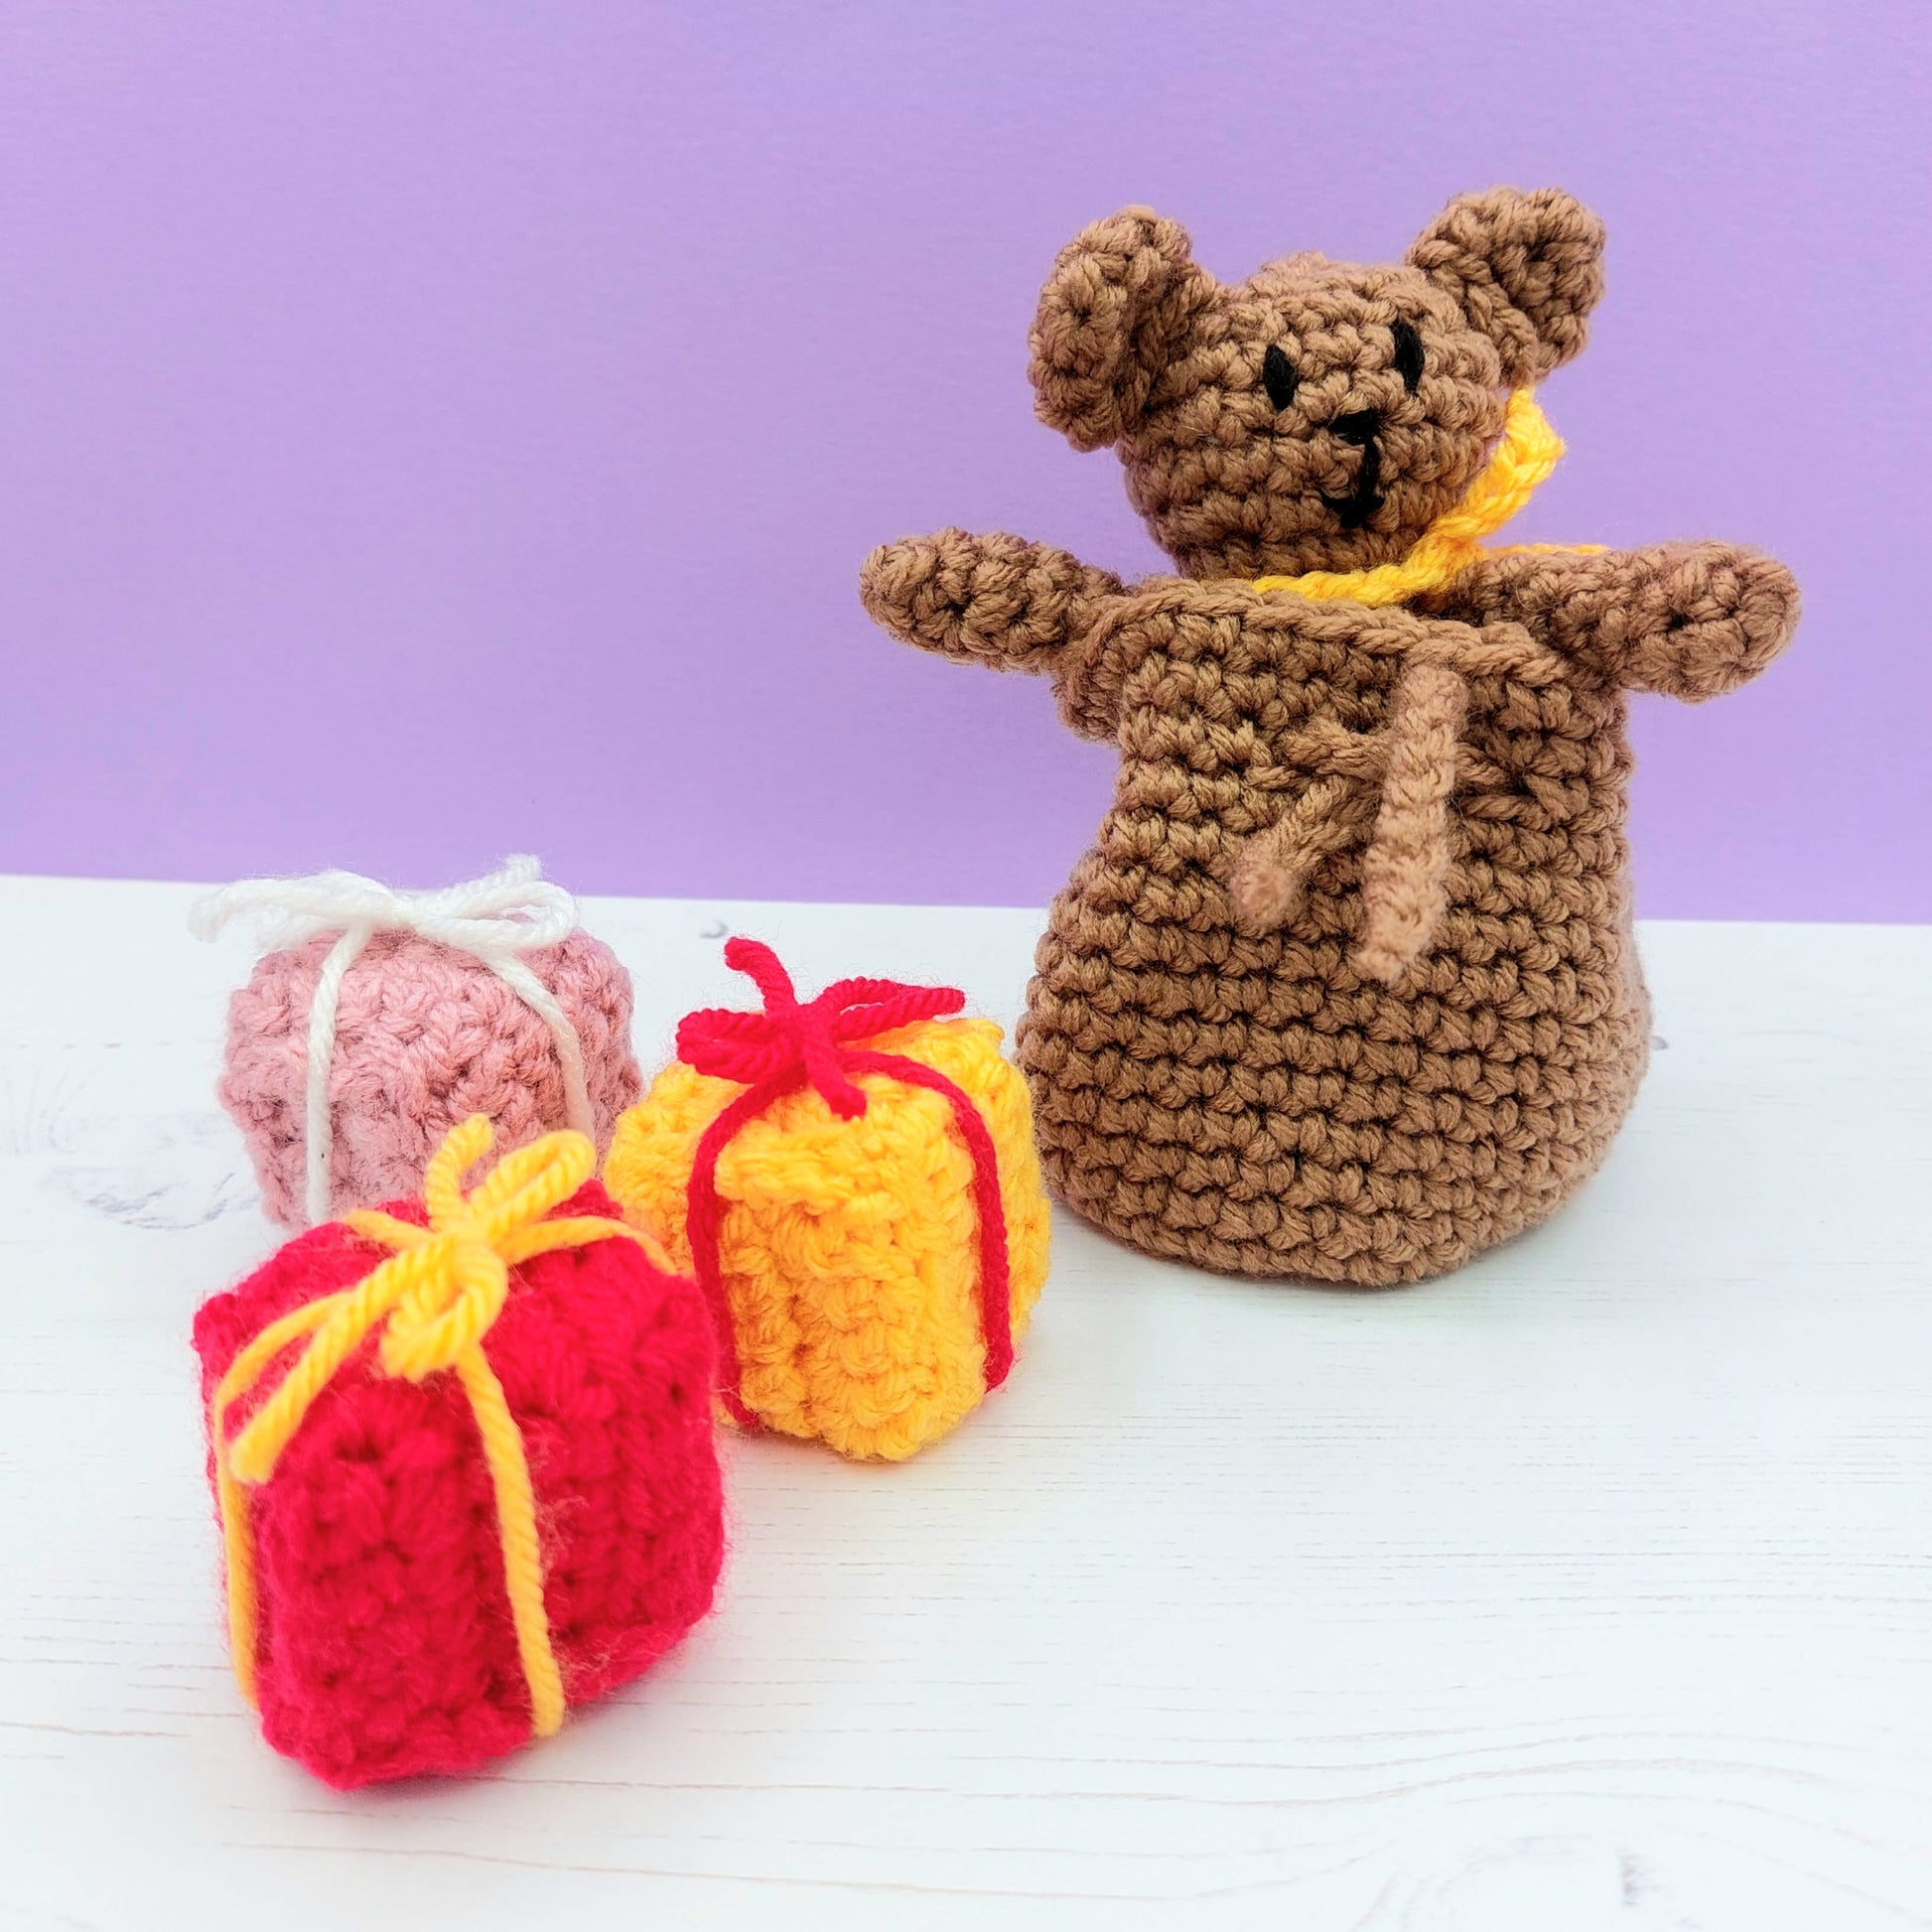 Crochet Presents and small teddy